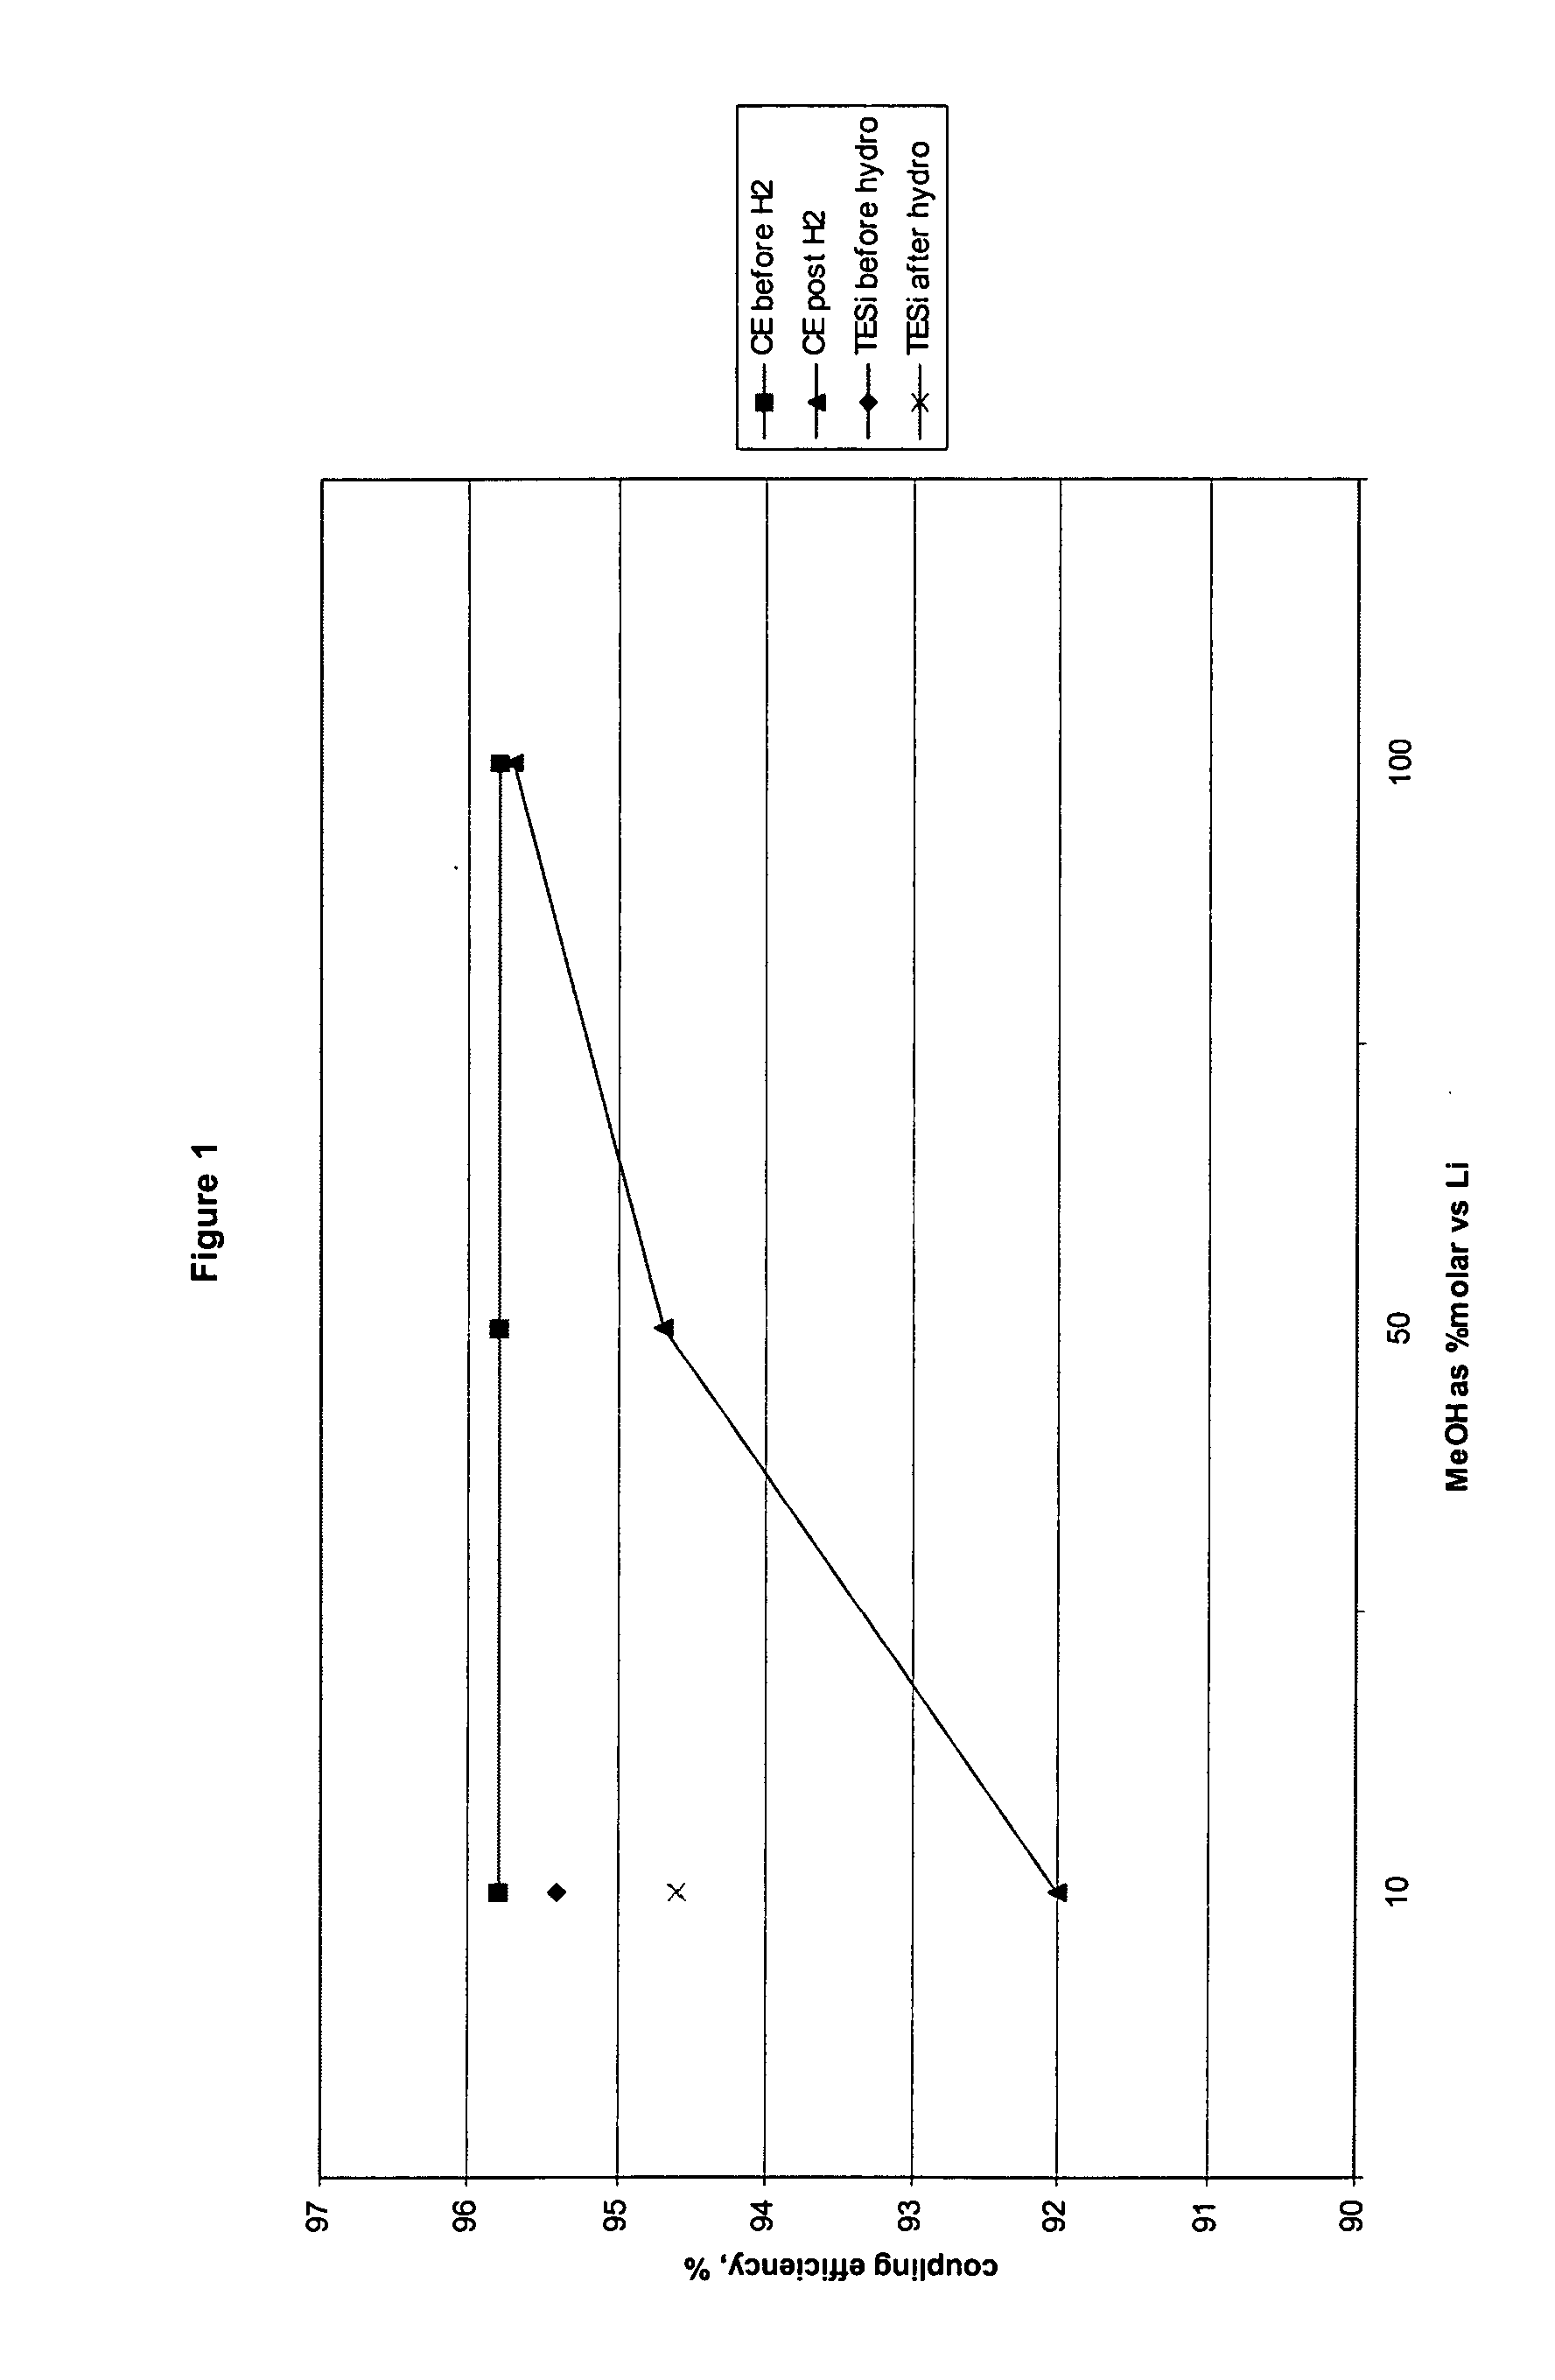 Process for preparing block copolymer and resulting composition